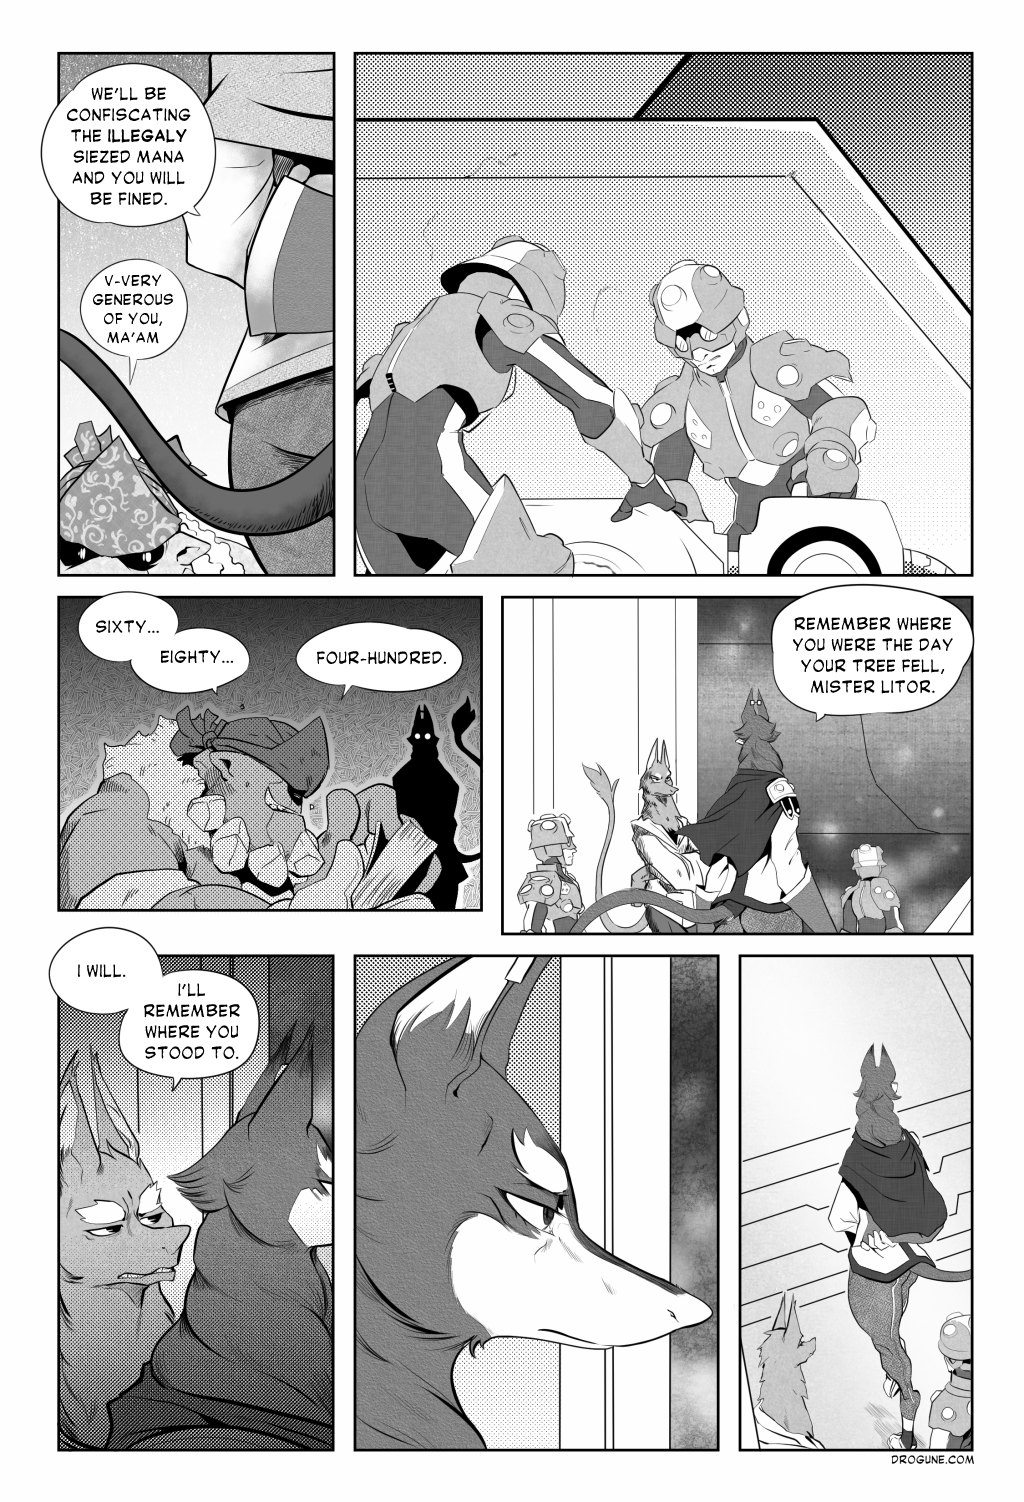 Book I • Page 23